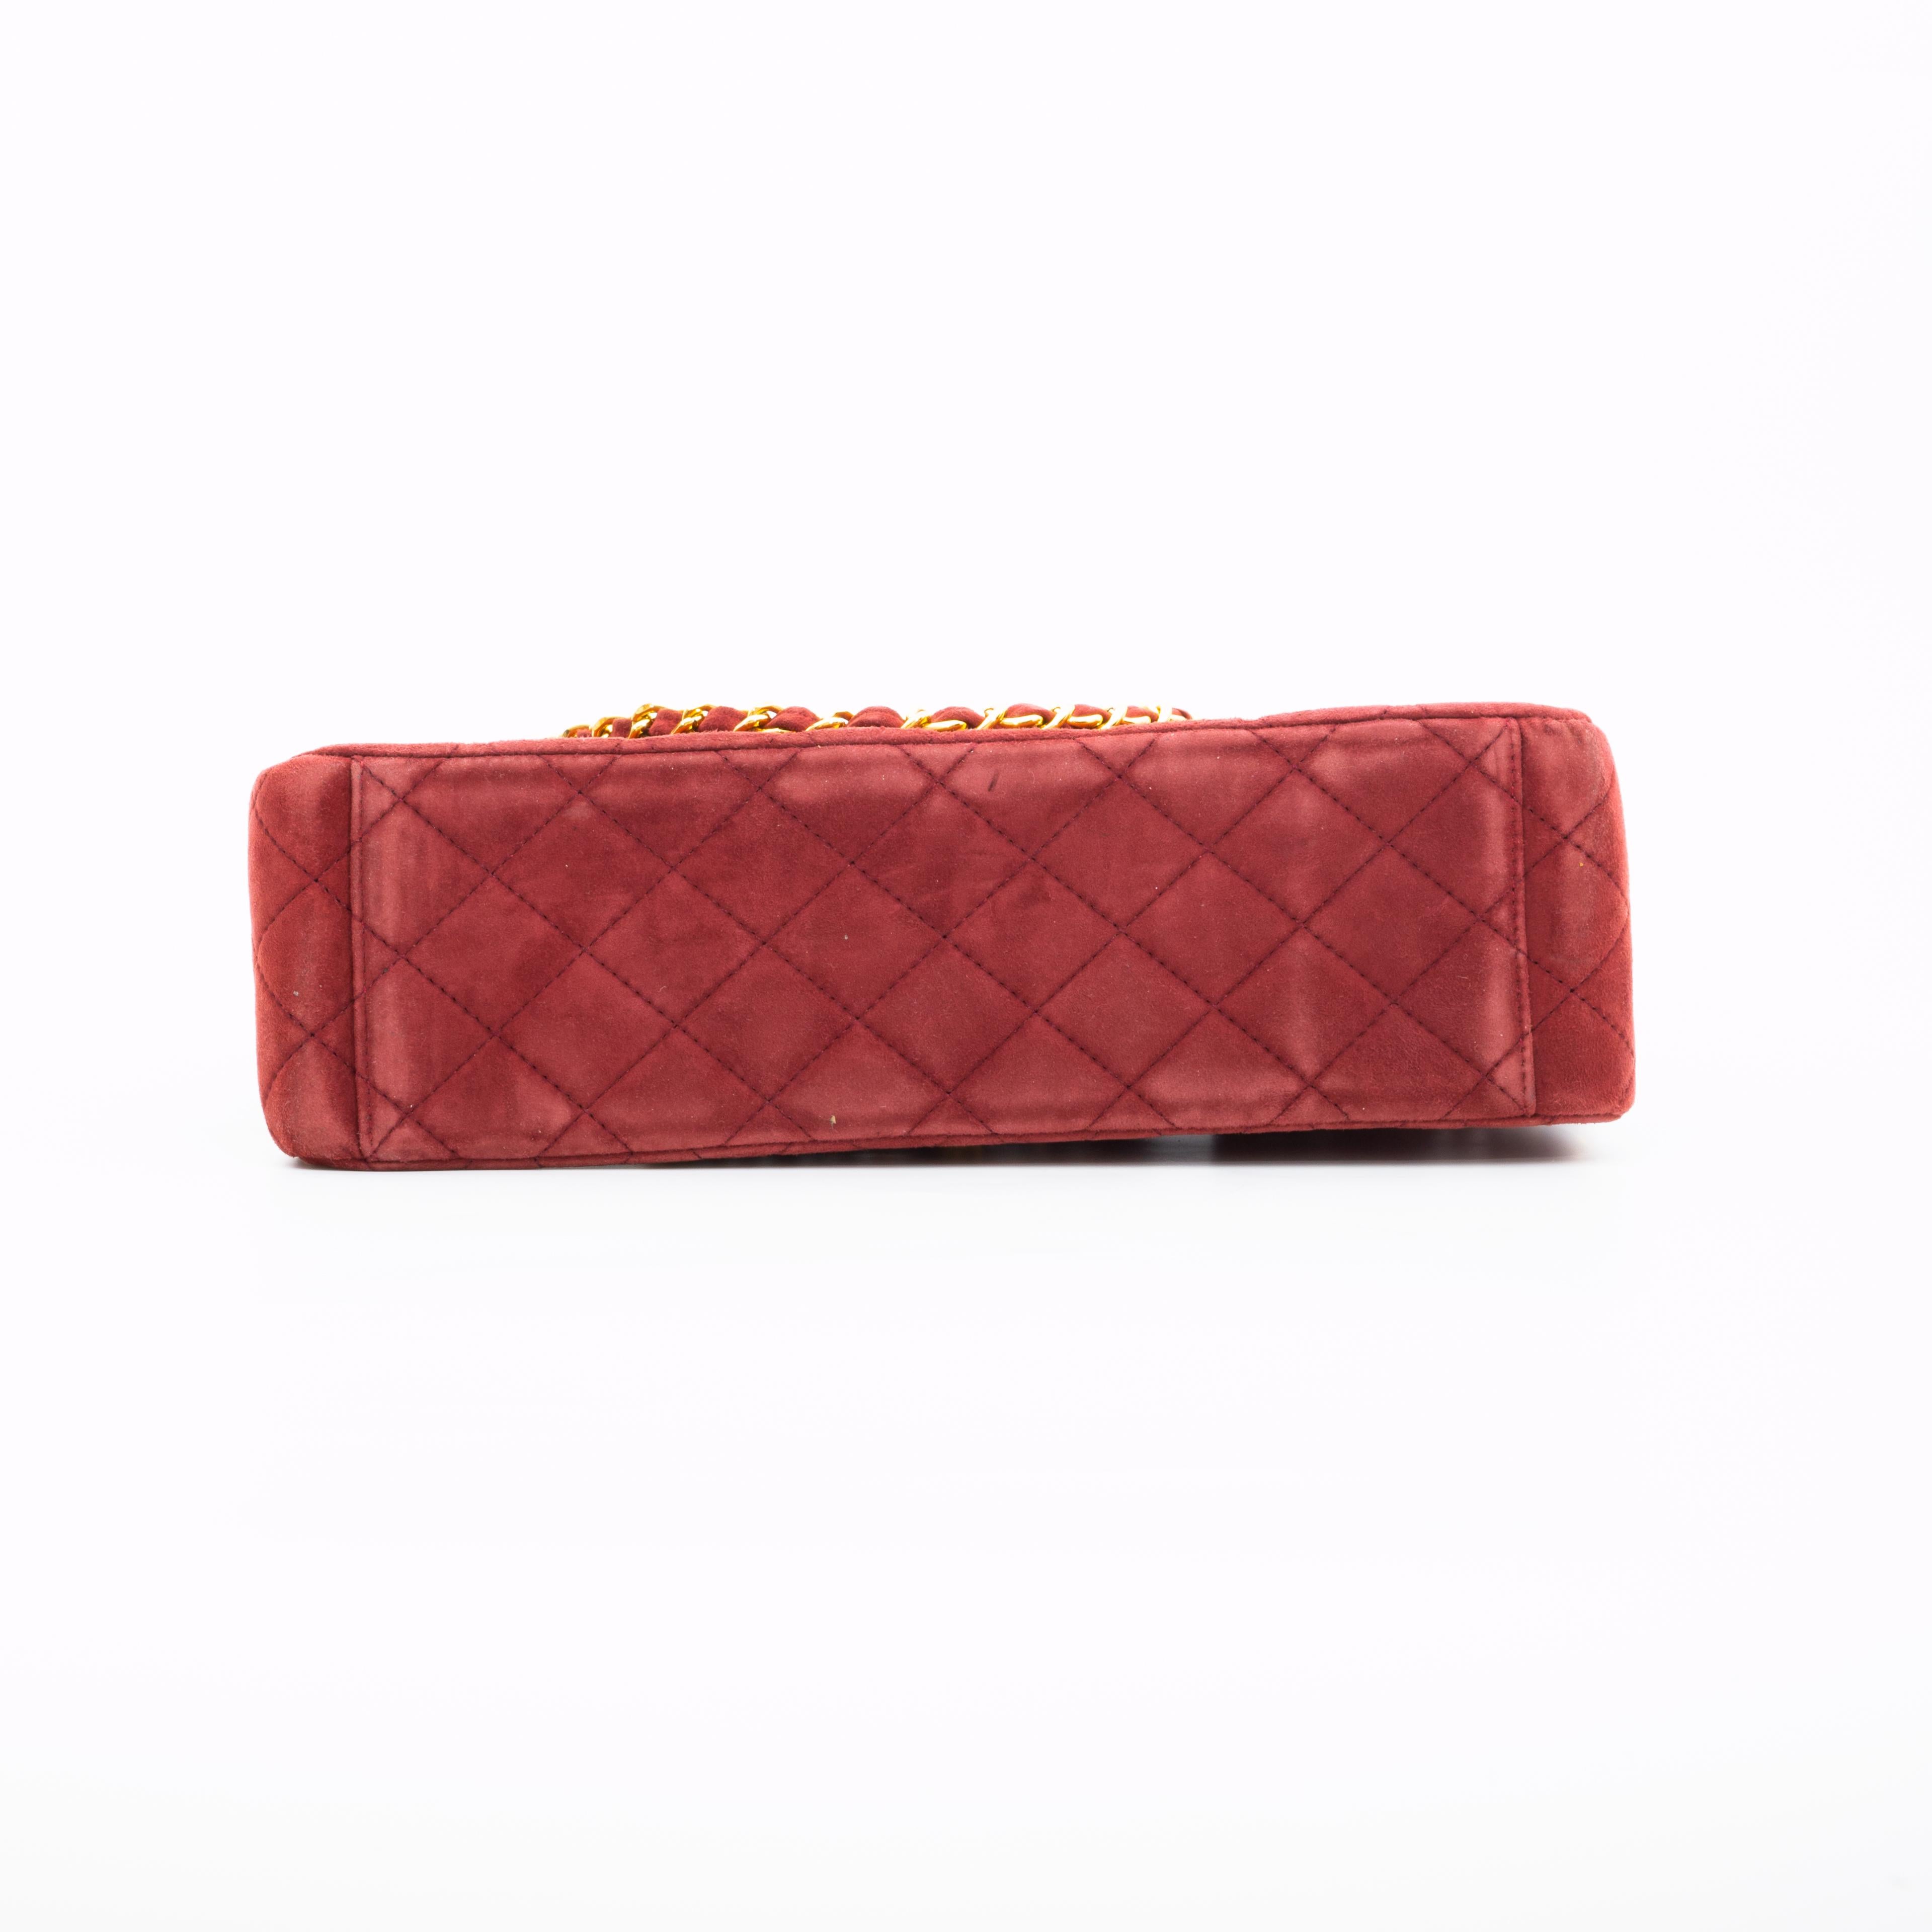 Red Chanel Classic Quilted Burgundy Suede Jumbo Single Flap Bag